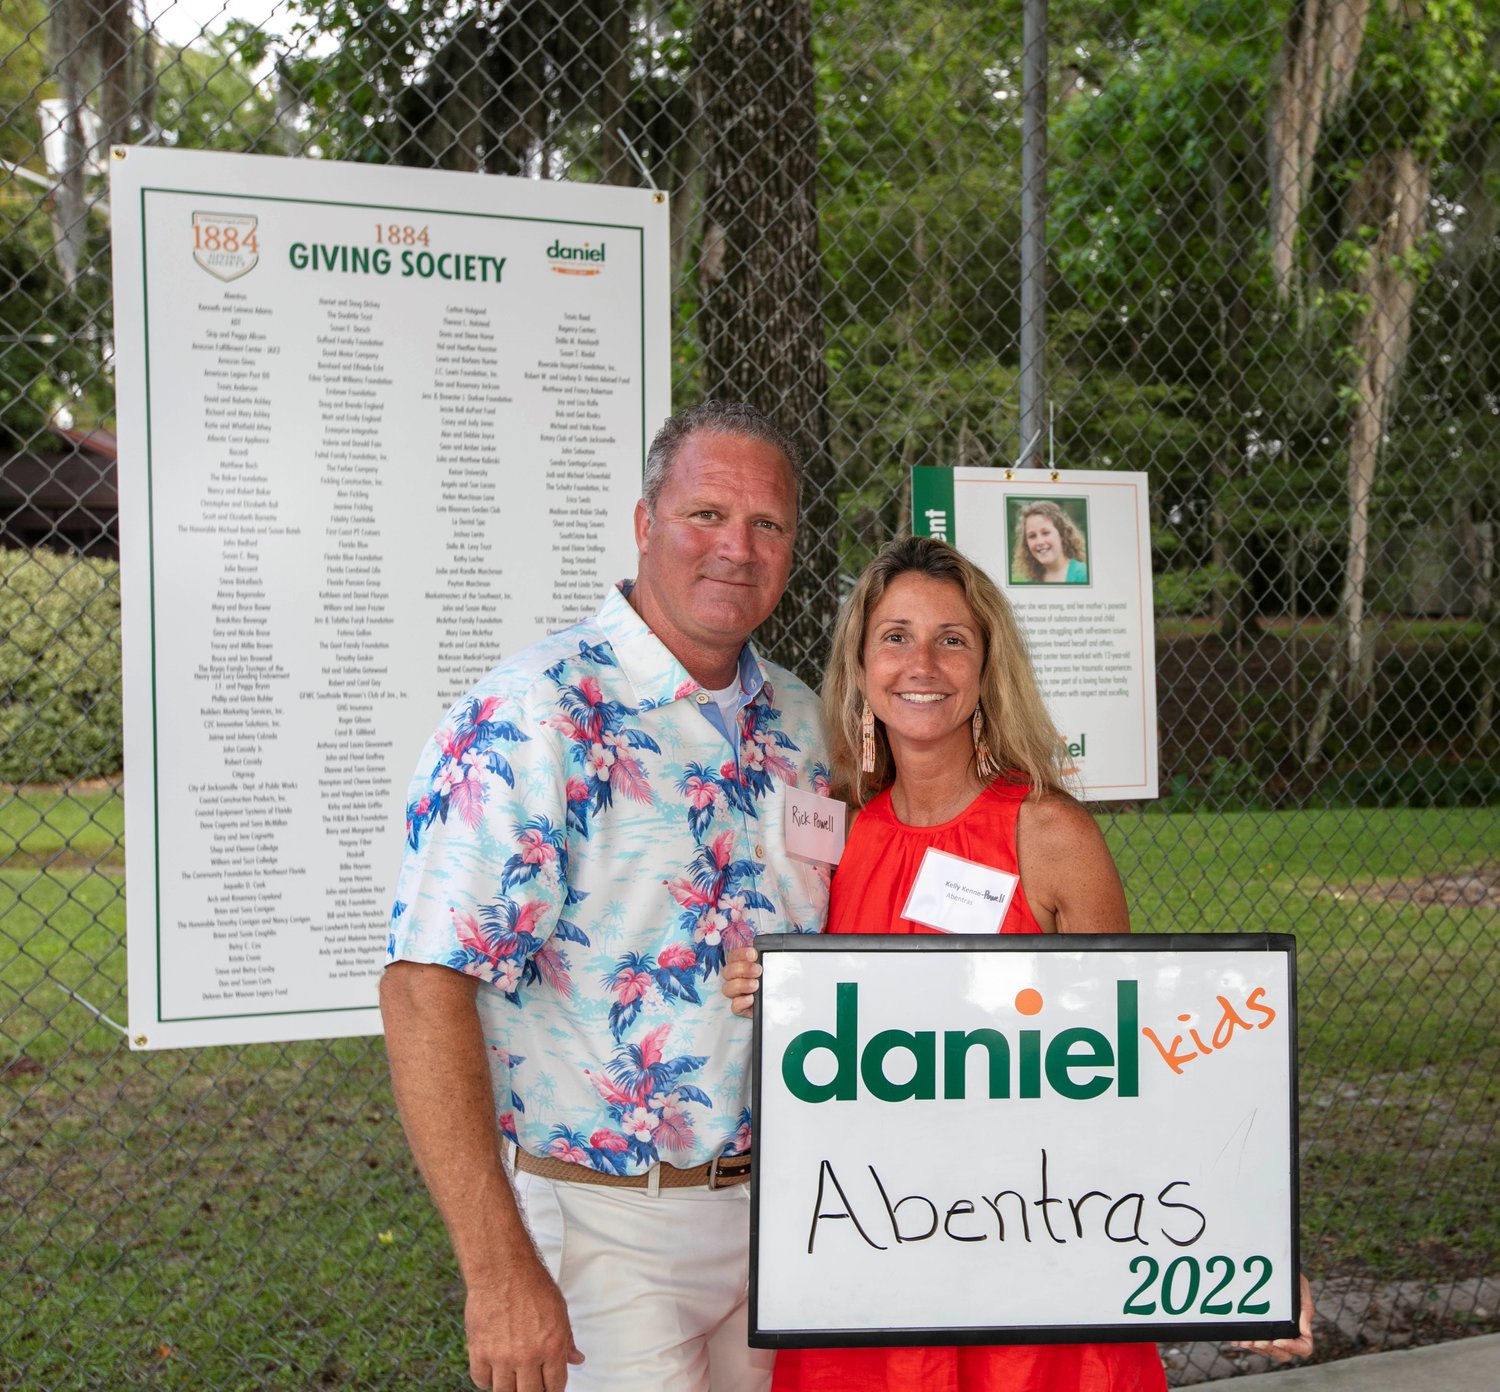 Rick Powell and Kelly Kenne-Powell of Abentras, located in Ponte Vedra, during the 1884 Giving Society event, which benefits Daniel.